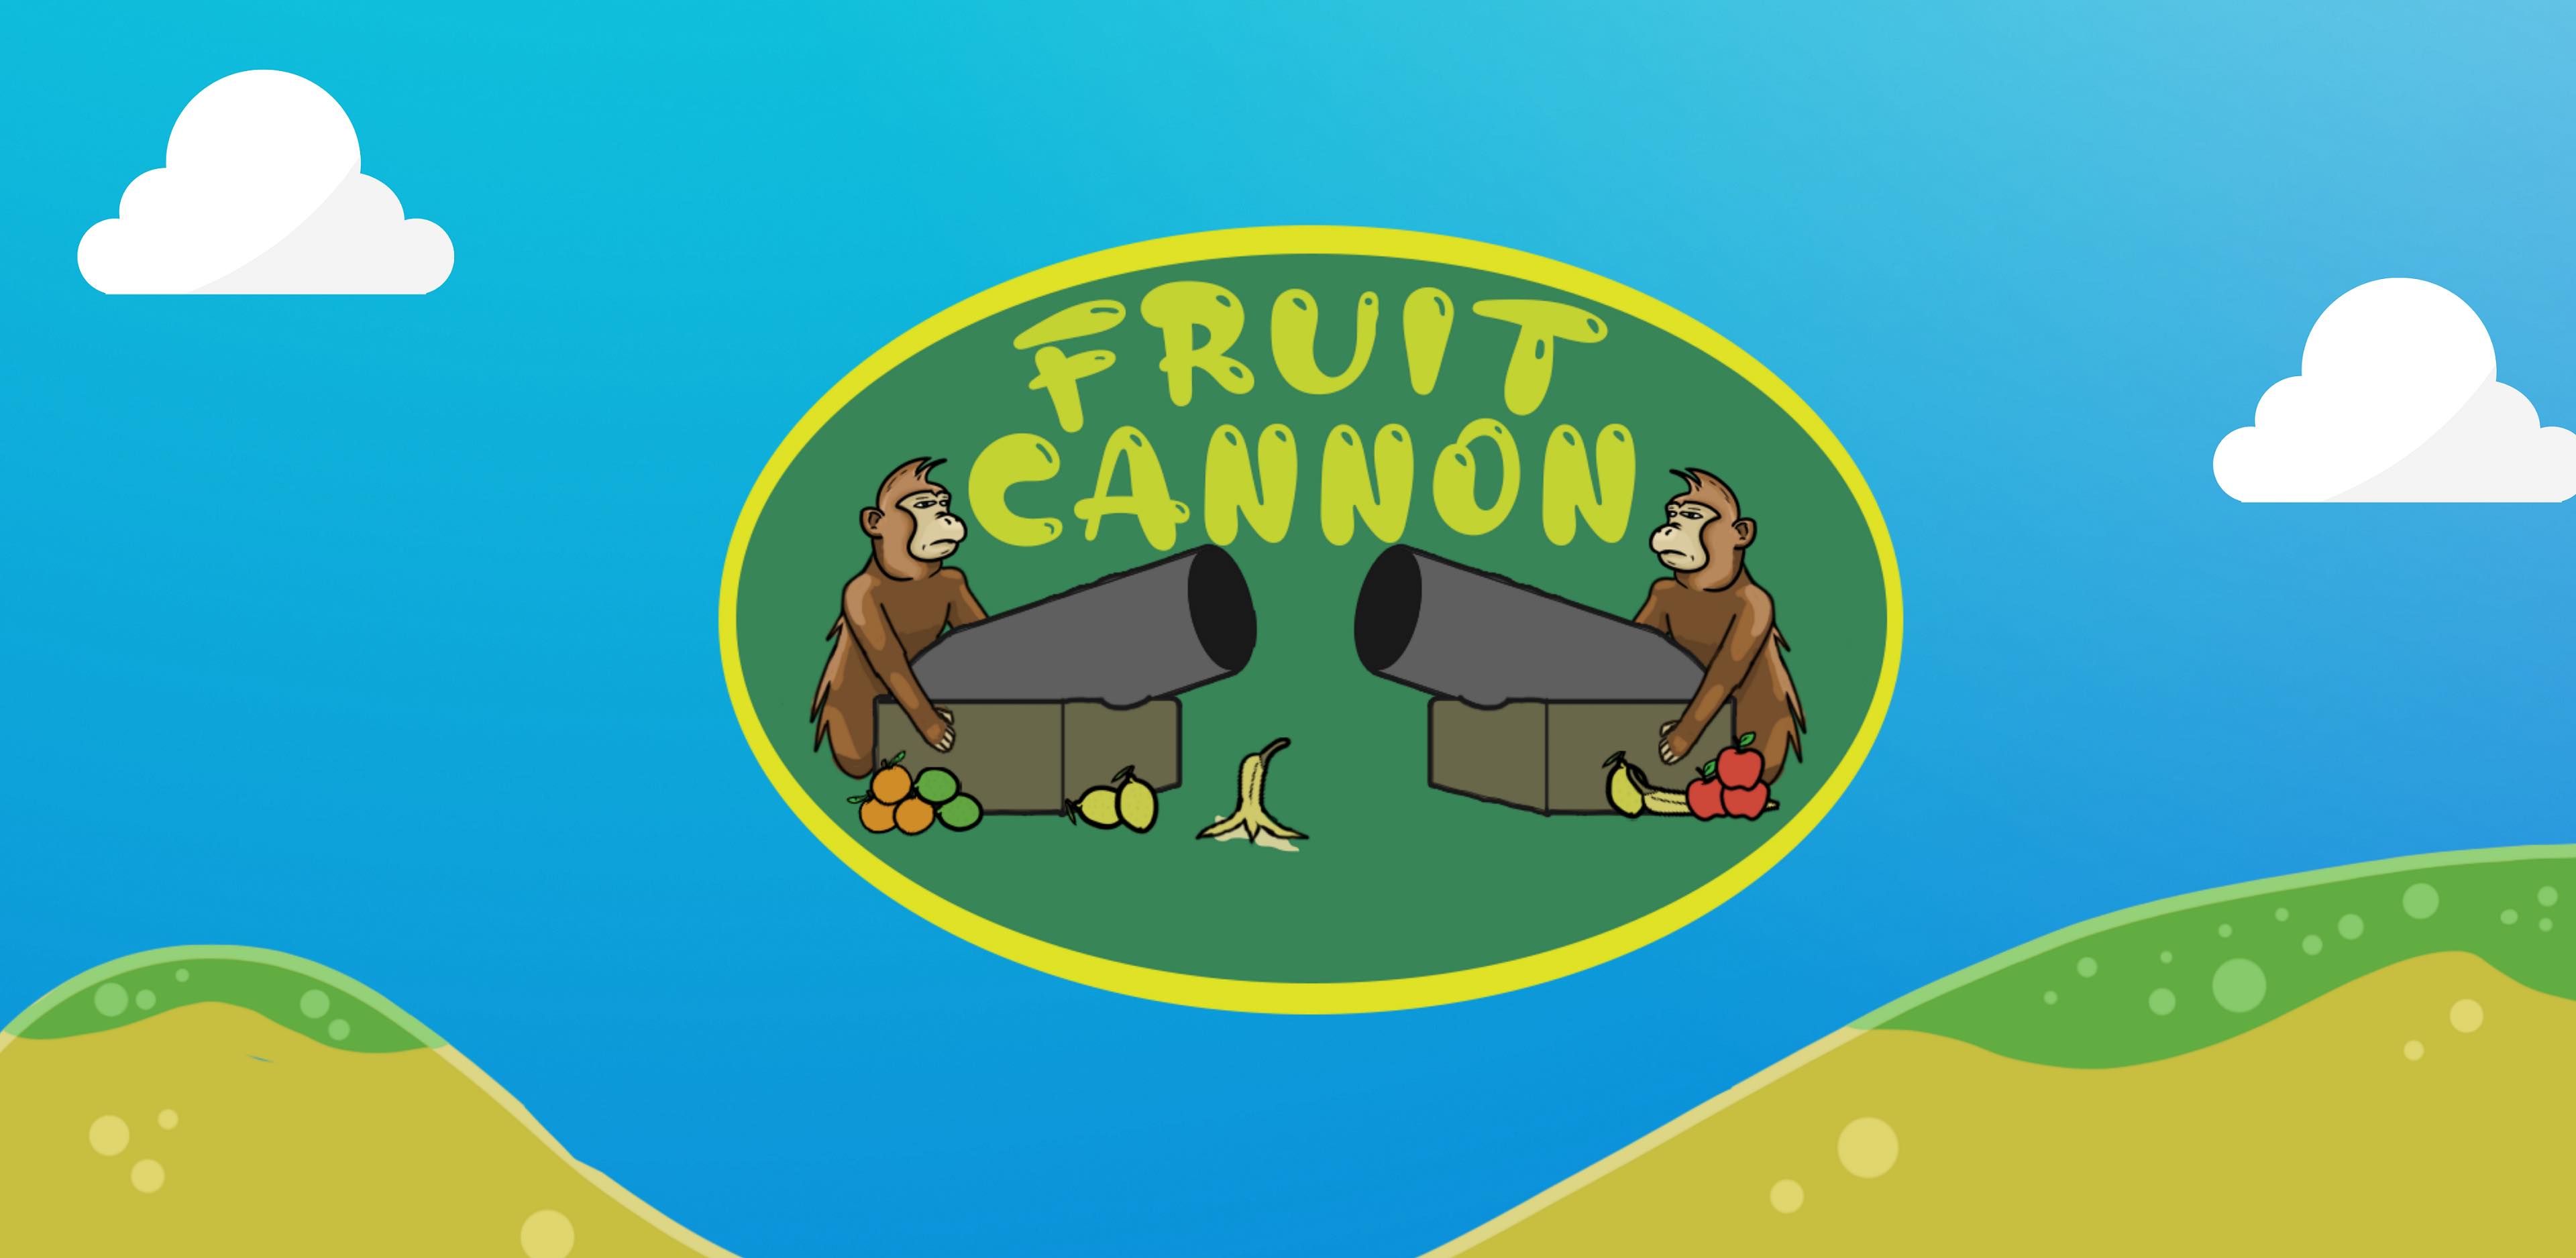 Fruit Cannons